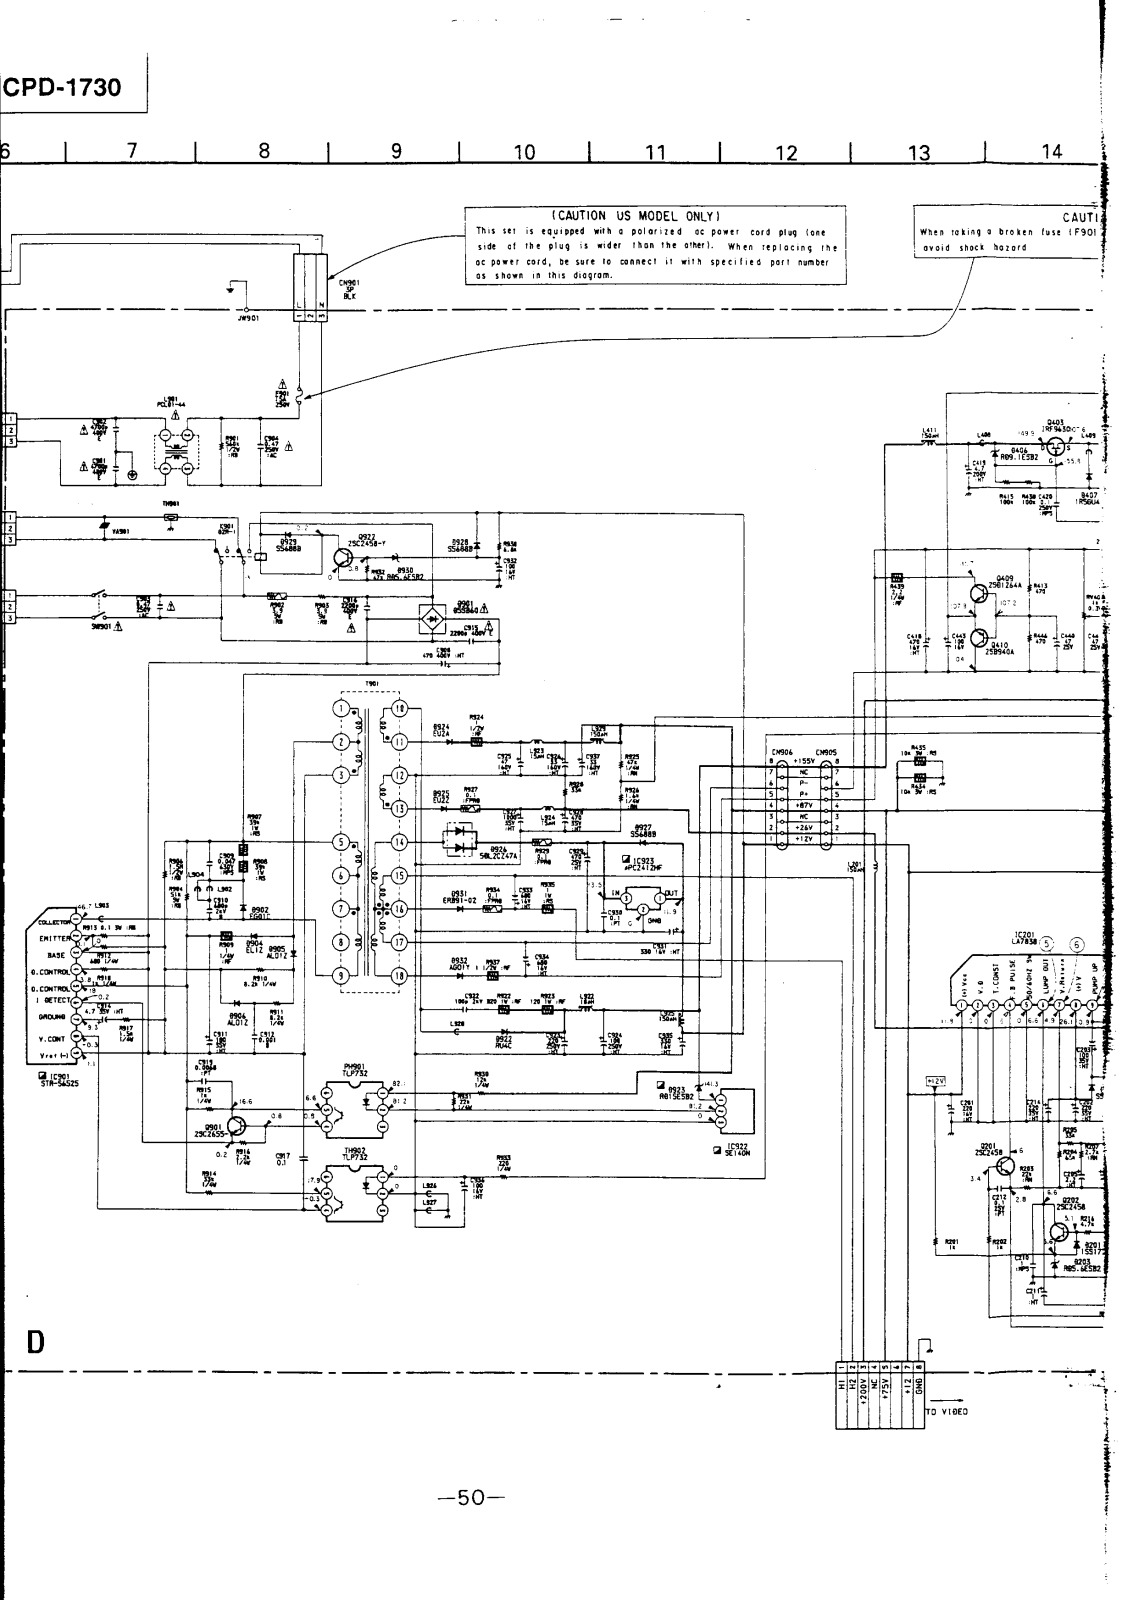 Sony CPD-1730 Schematic